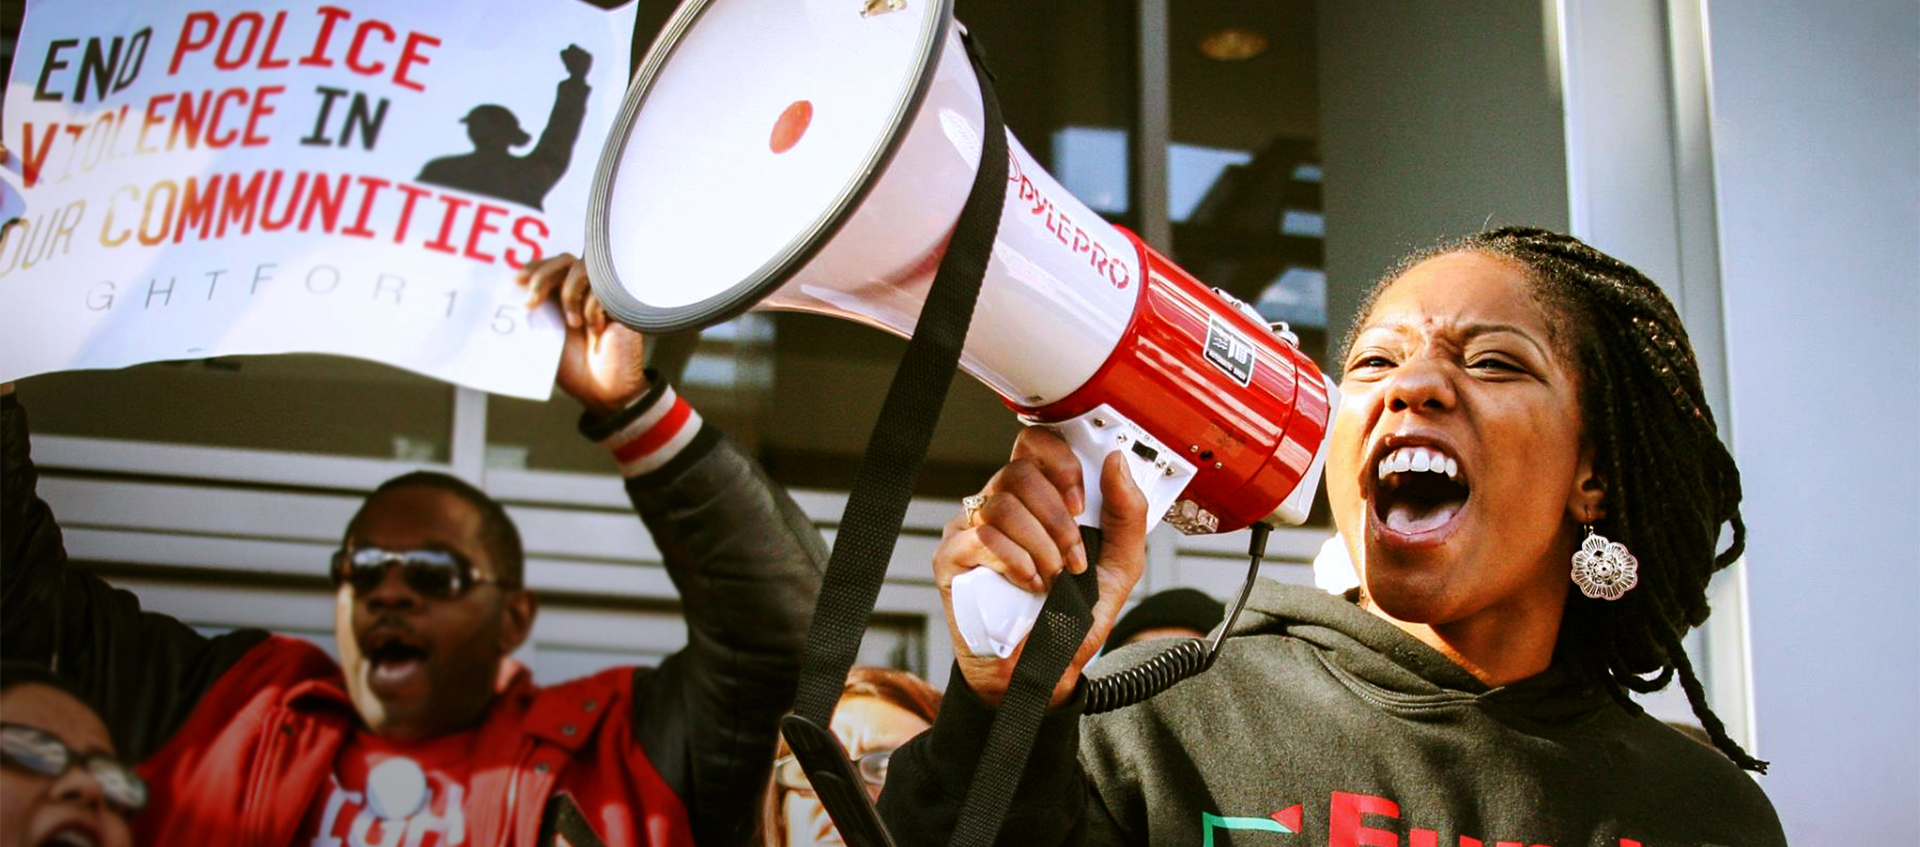 A woman shouts passionately into a megaphone while a man behind her holds up a sign supporting the end of police violence.